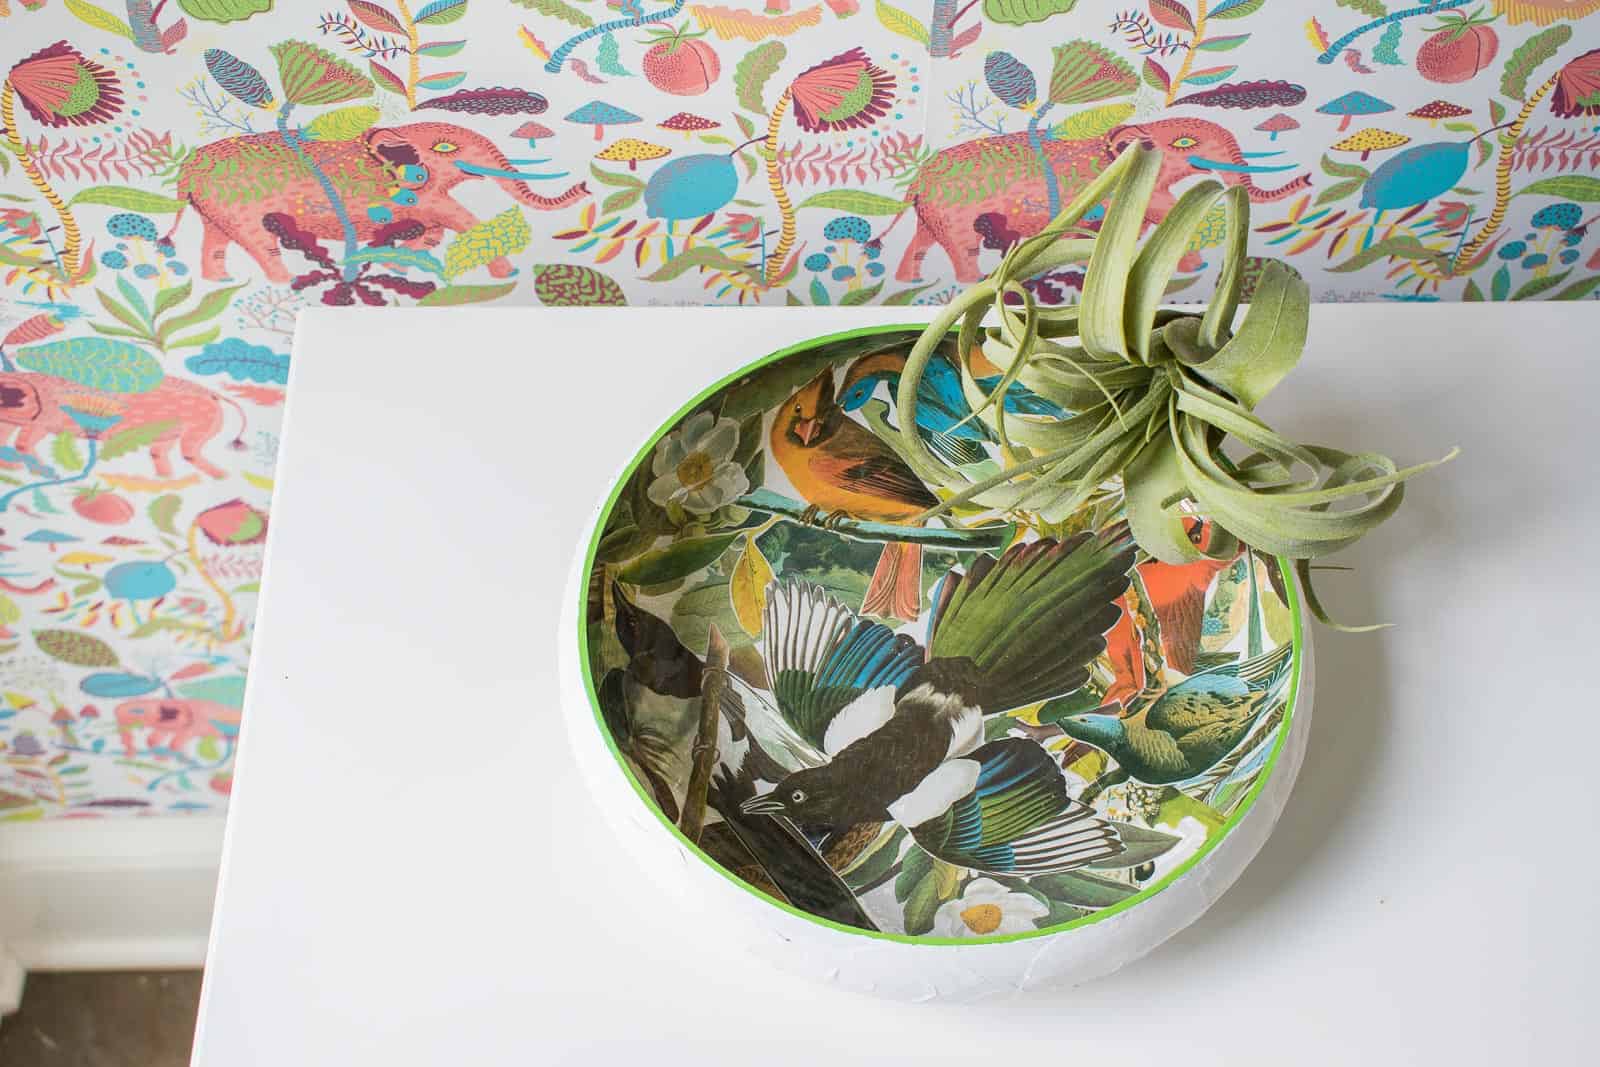 How to Decoupage a Glass Bowl - At Charlotte's House